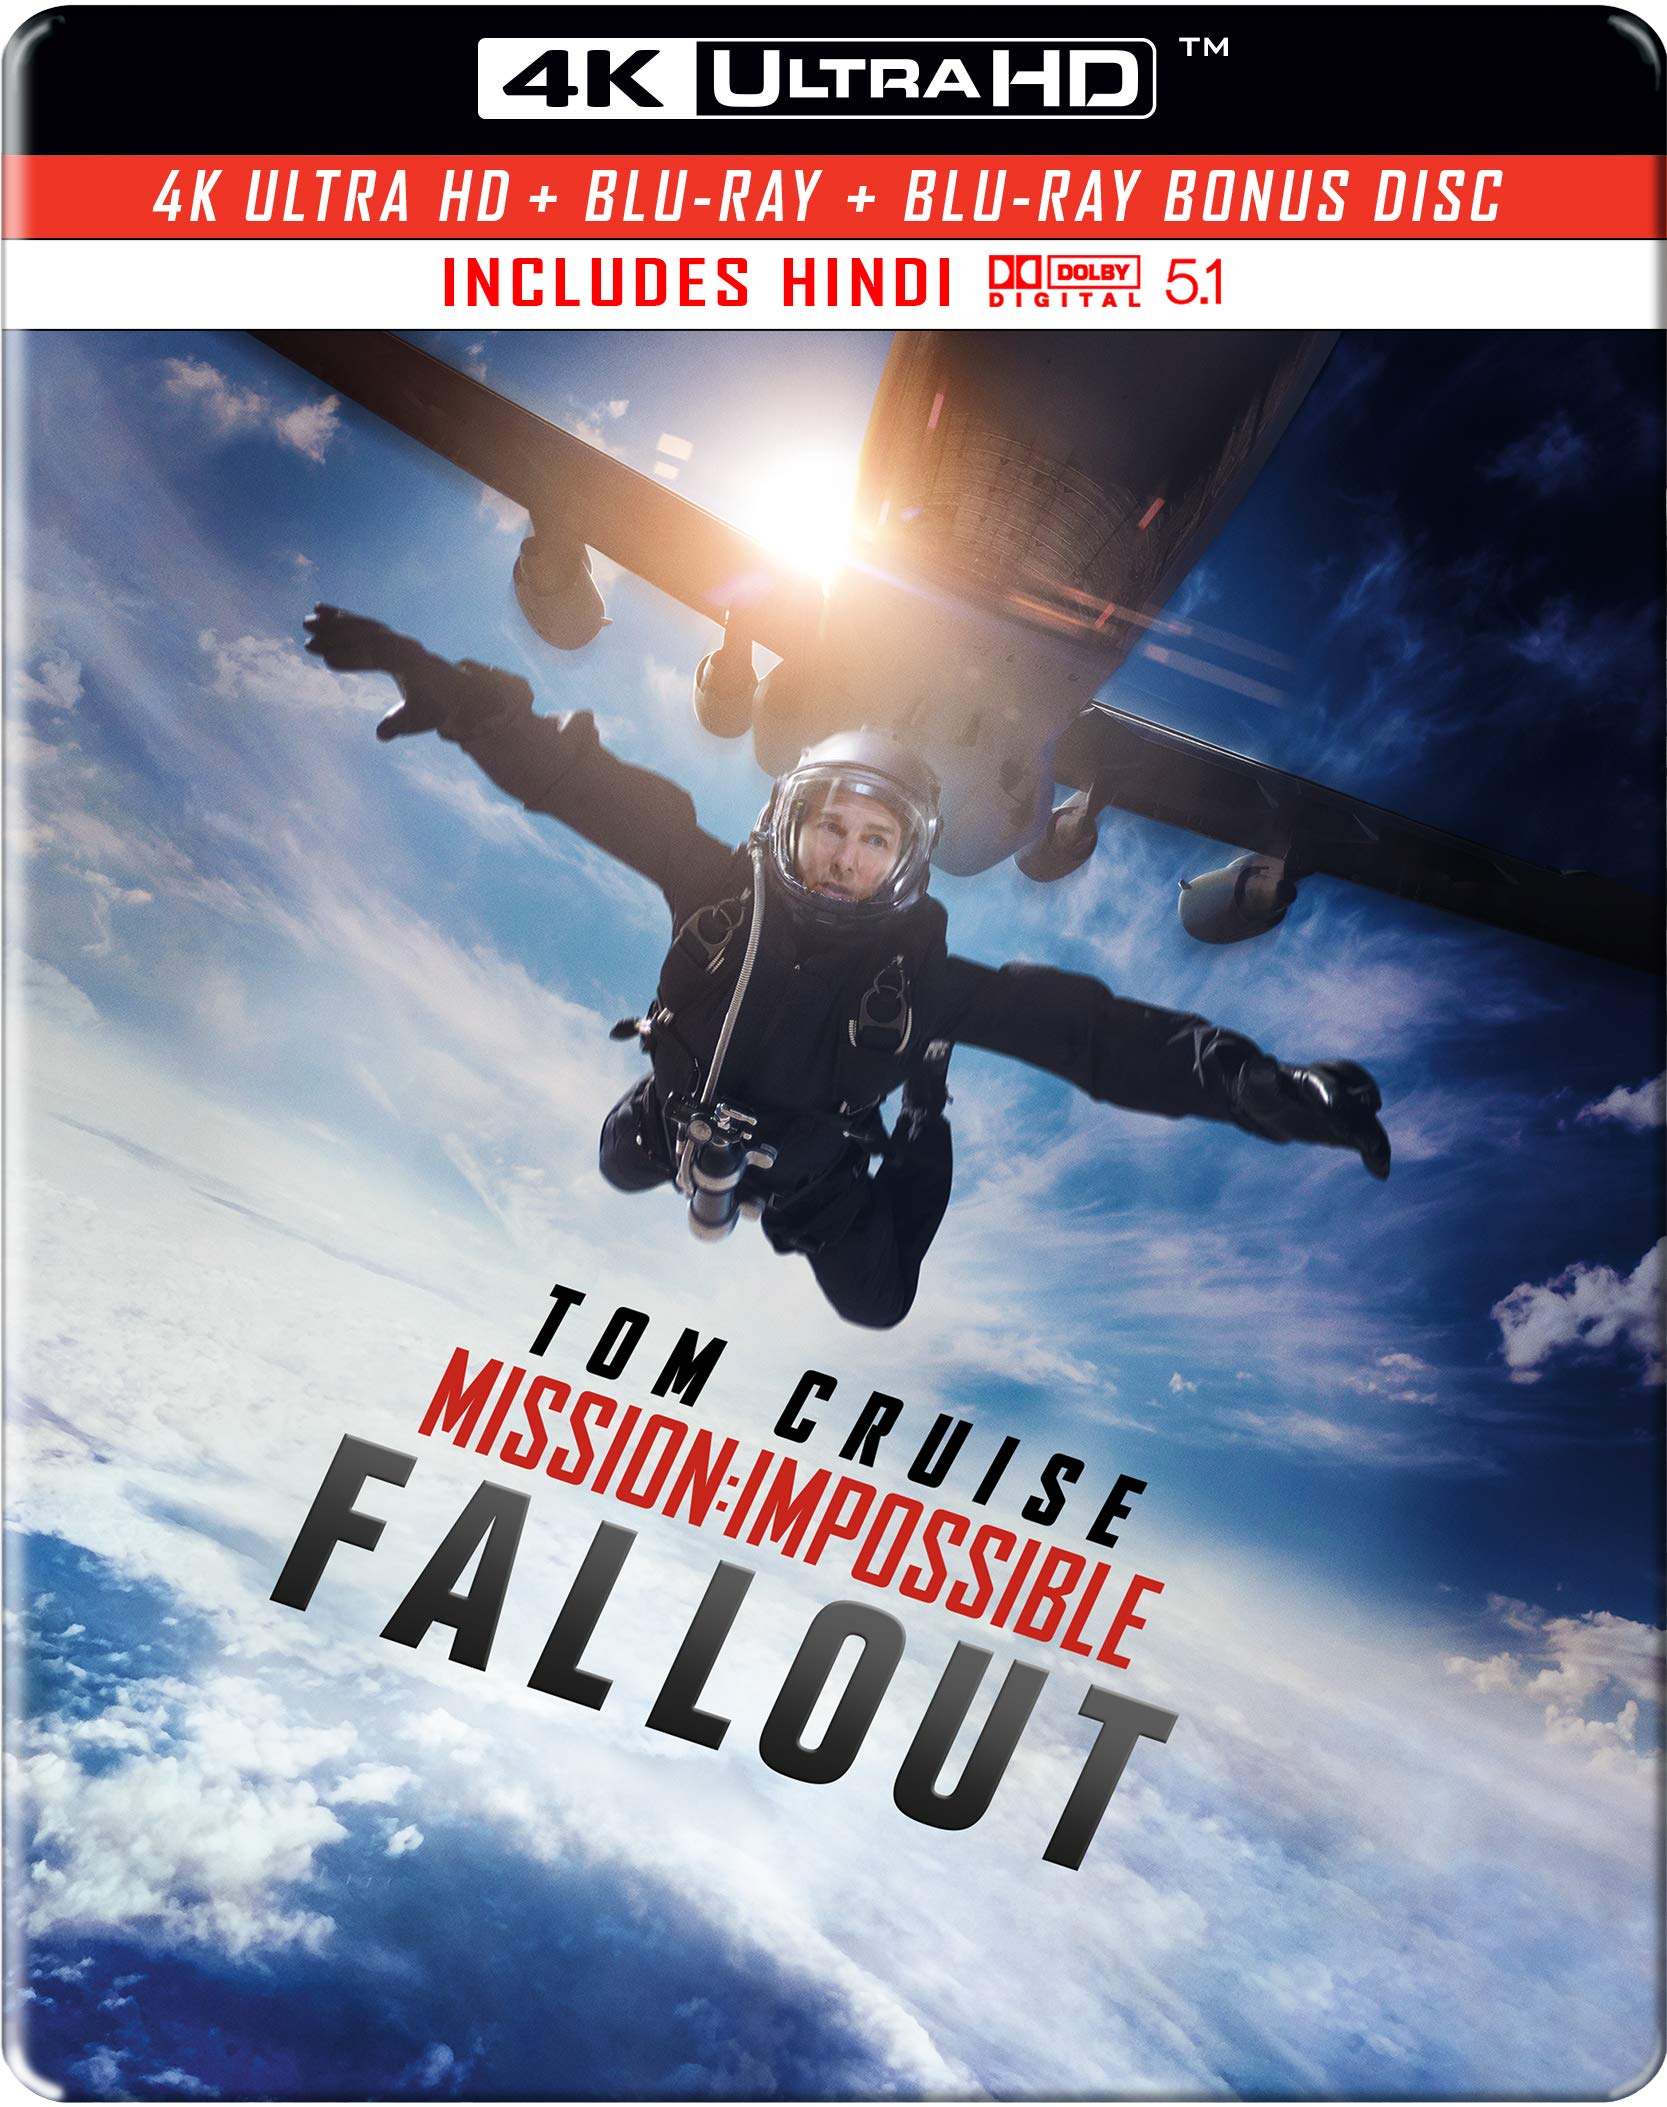 mission impossible 5 full movie watch online in hindi